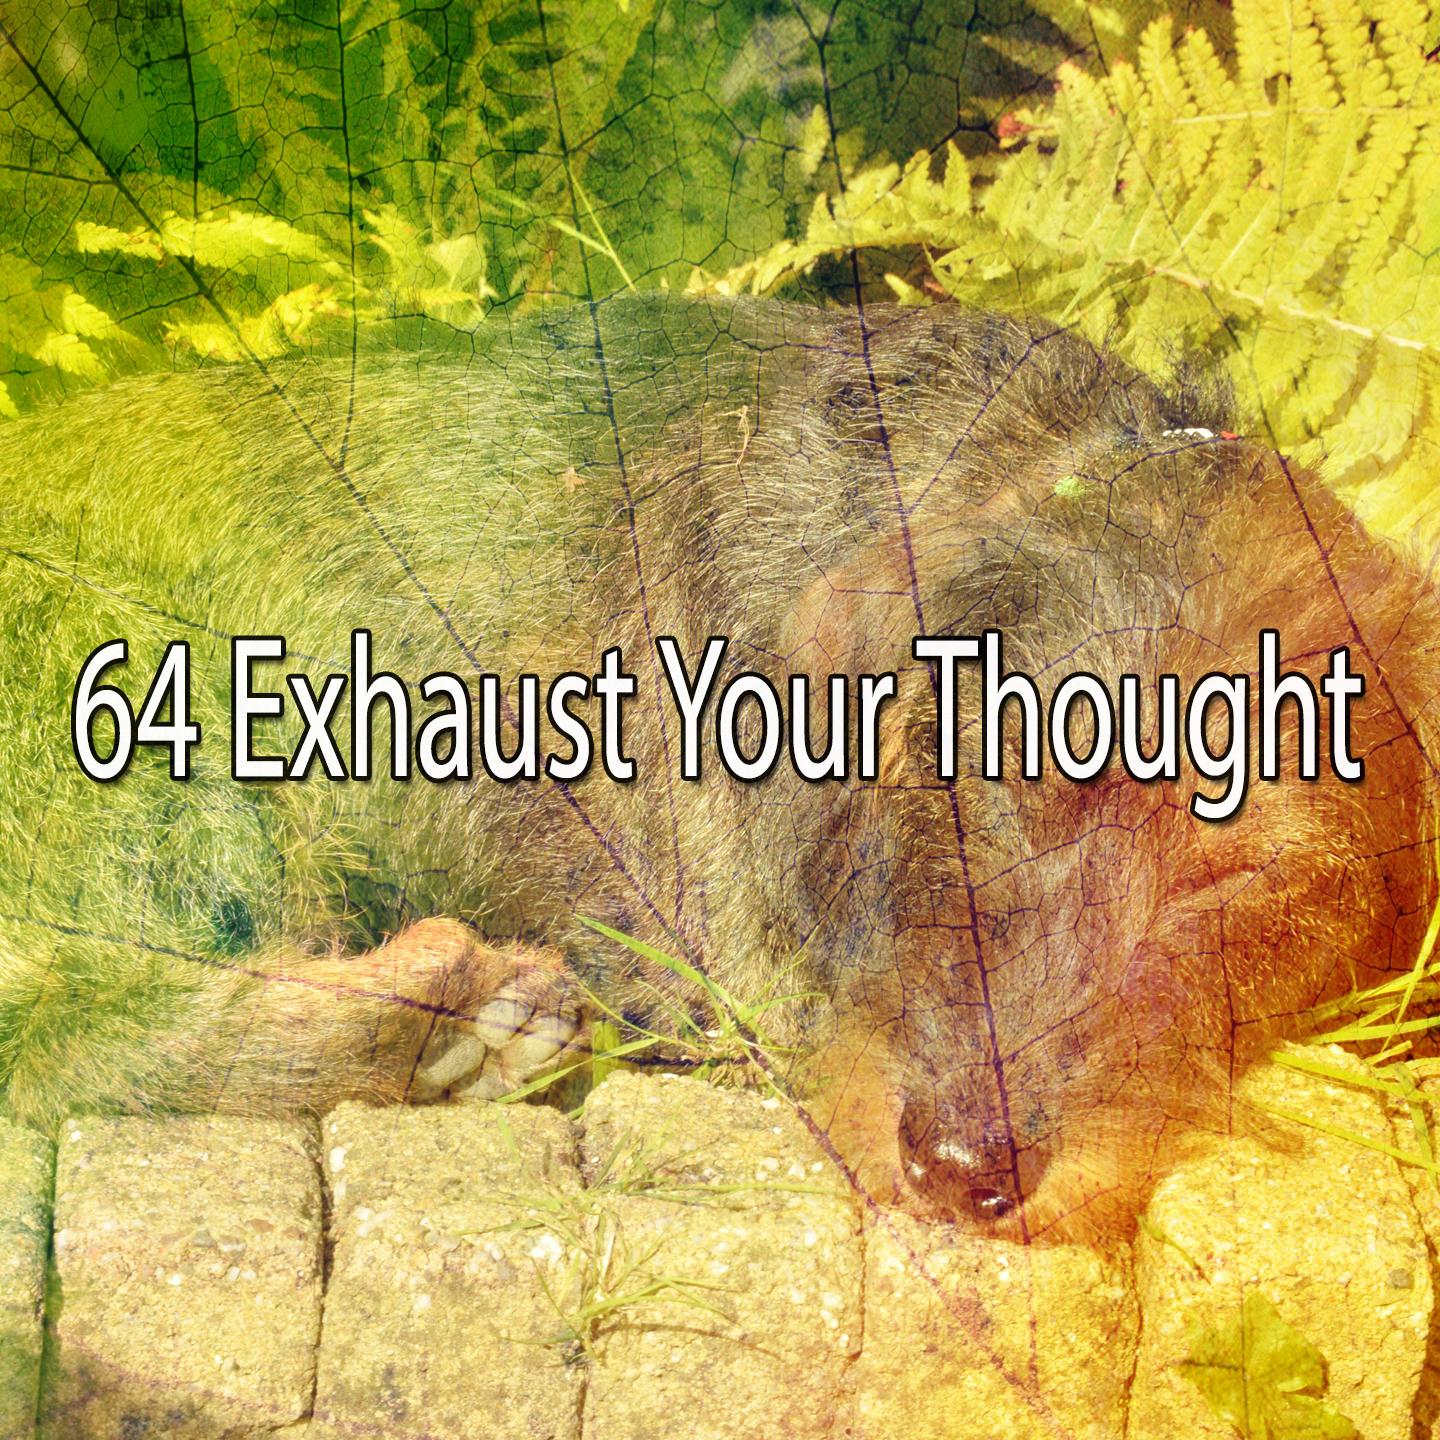 64 Exhaust Your Thought